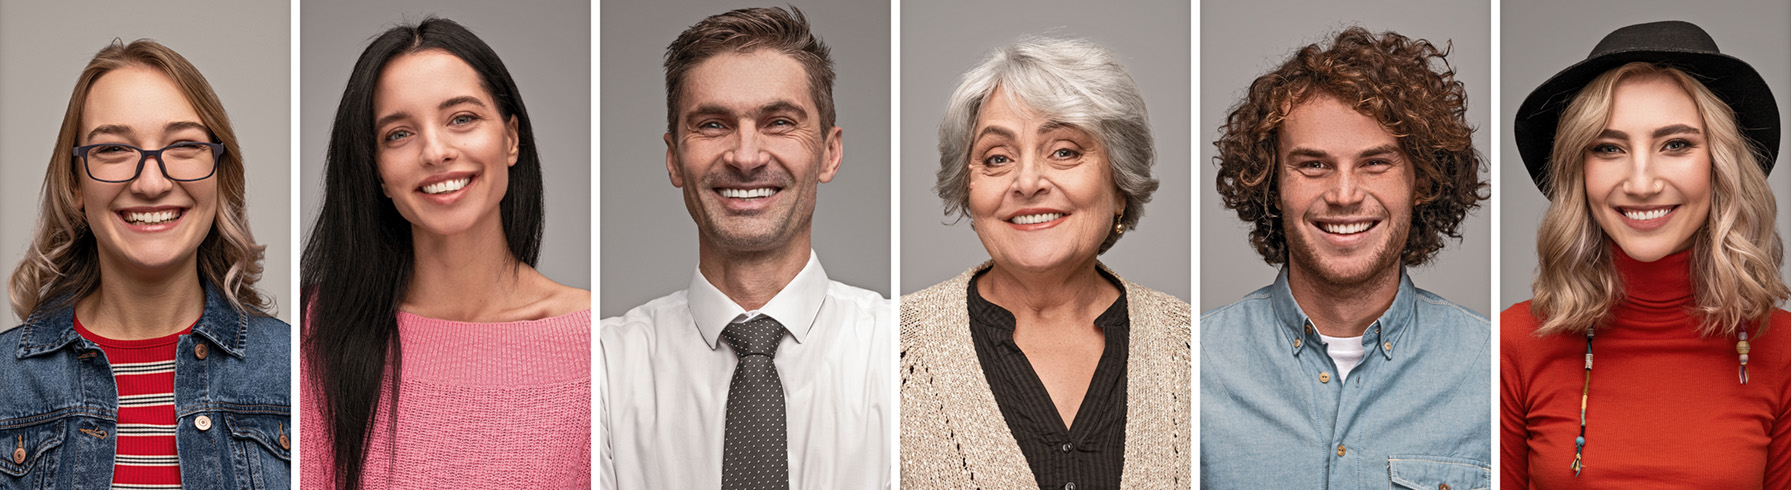 Set of portraits of confident people of all generations cheerfully smiling and looking at camera